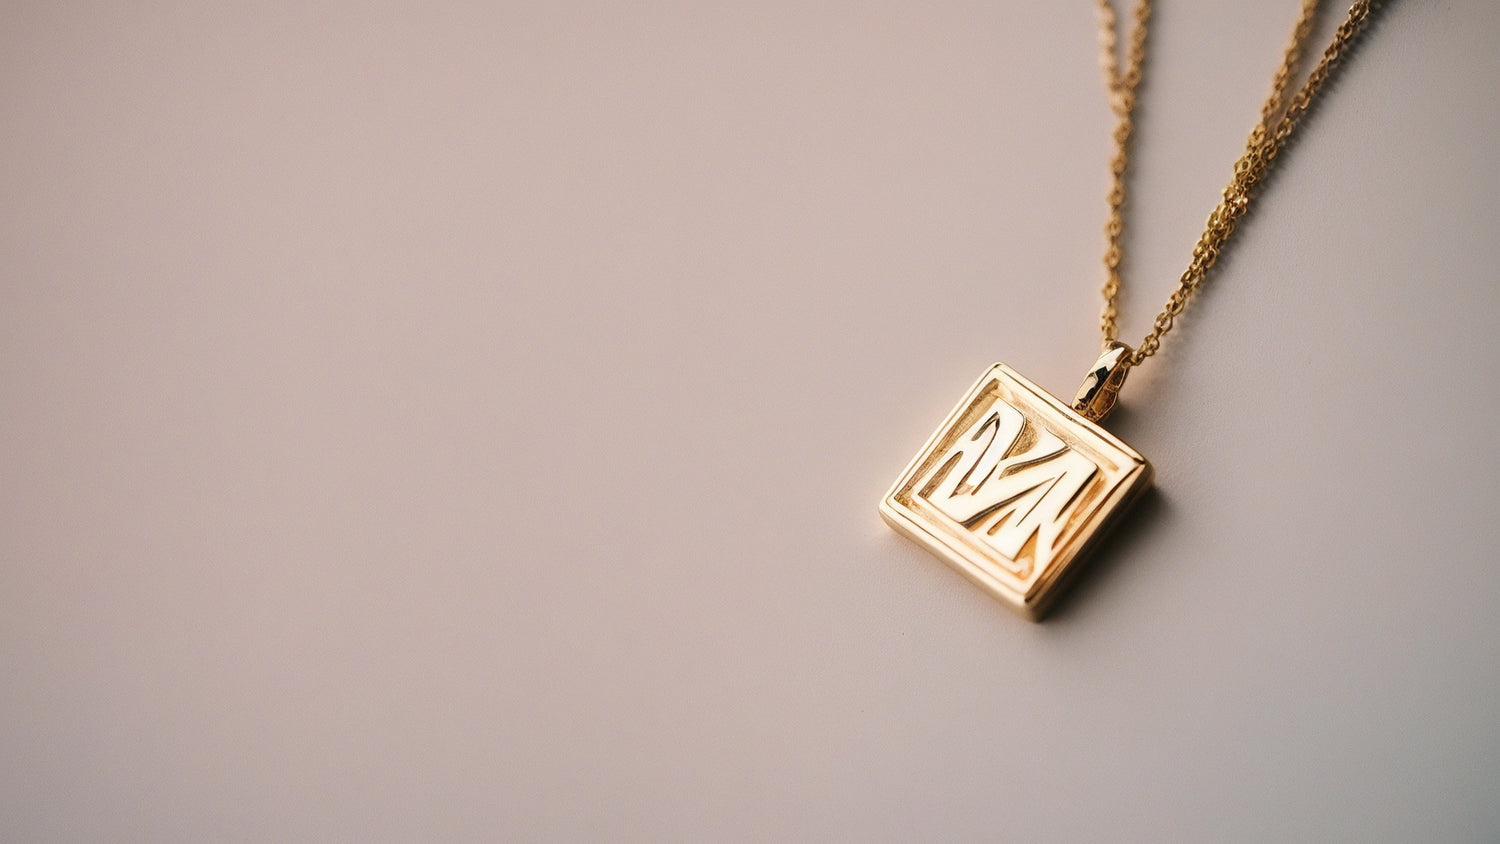 The Significance of Initial Necklaces in Fashion and Personal Expression